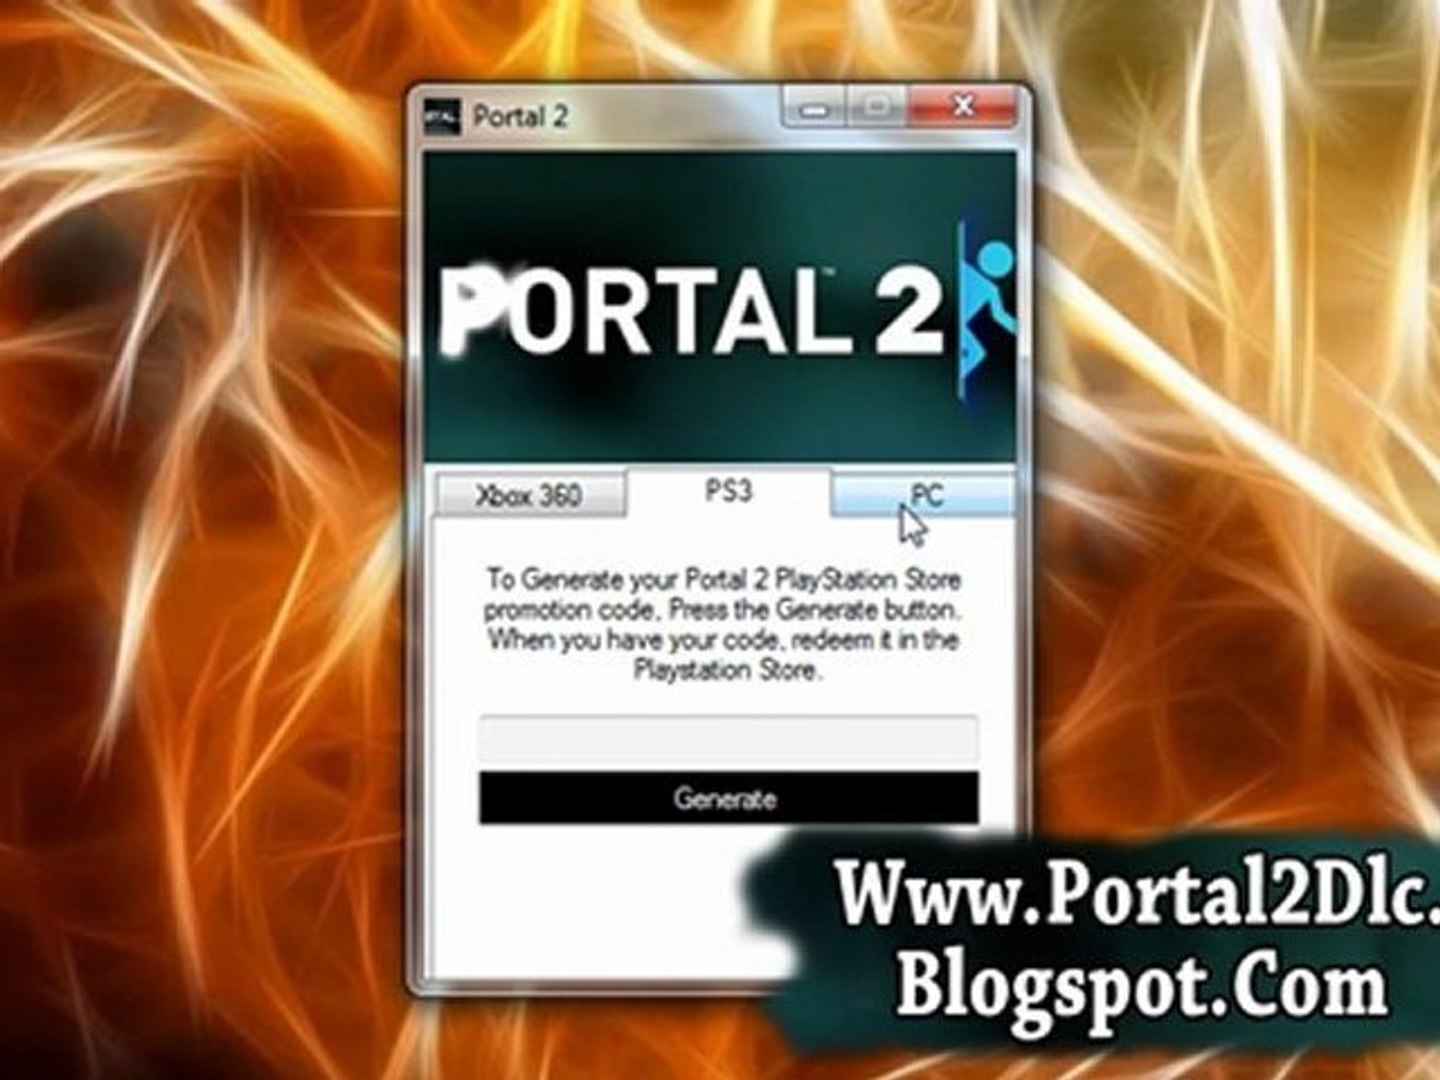 portal 2 playstation store,Free delivery,www.workscom.com.br